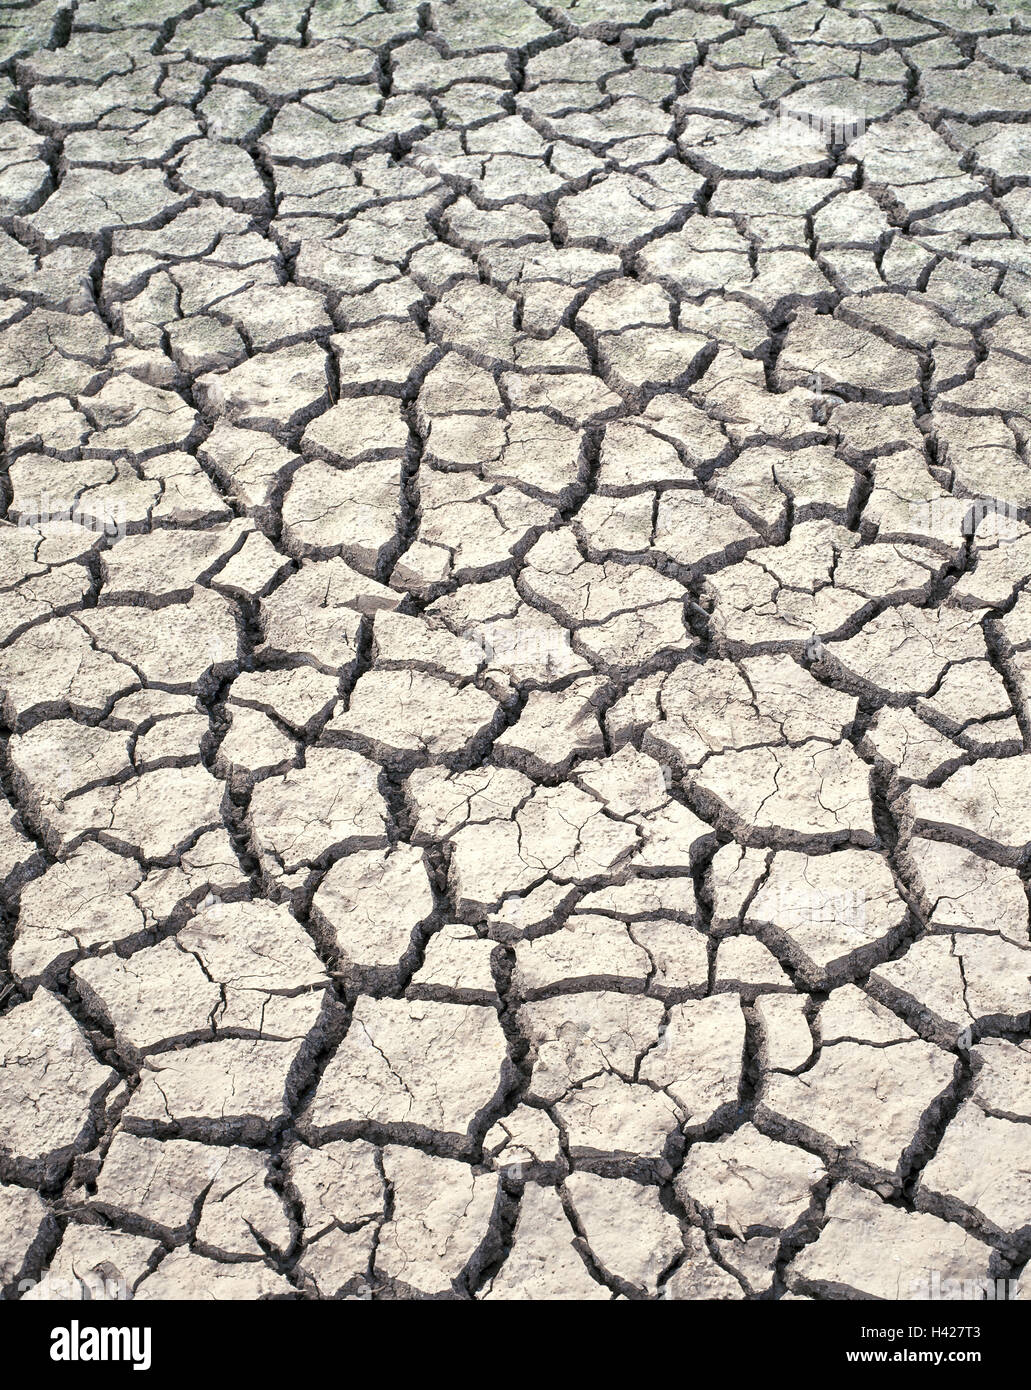 Ground, cracked, dryness, dryness, water shortage, floor, fissures, heat fissures, parched, dried up, life-hostilely, drily, conception, survival fight, thirst, dry weather, heat period, habitat, nature, environment, dry season, dry spell, climate, climat Stock Photo